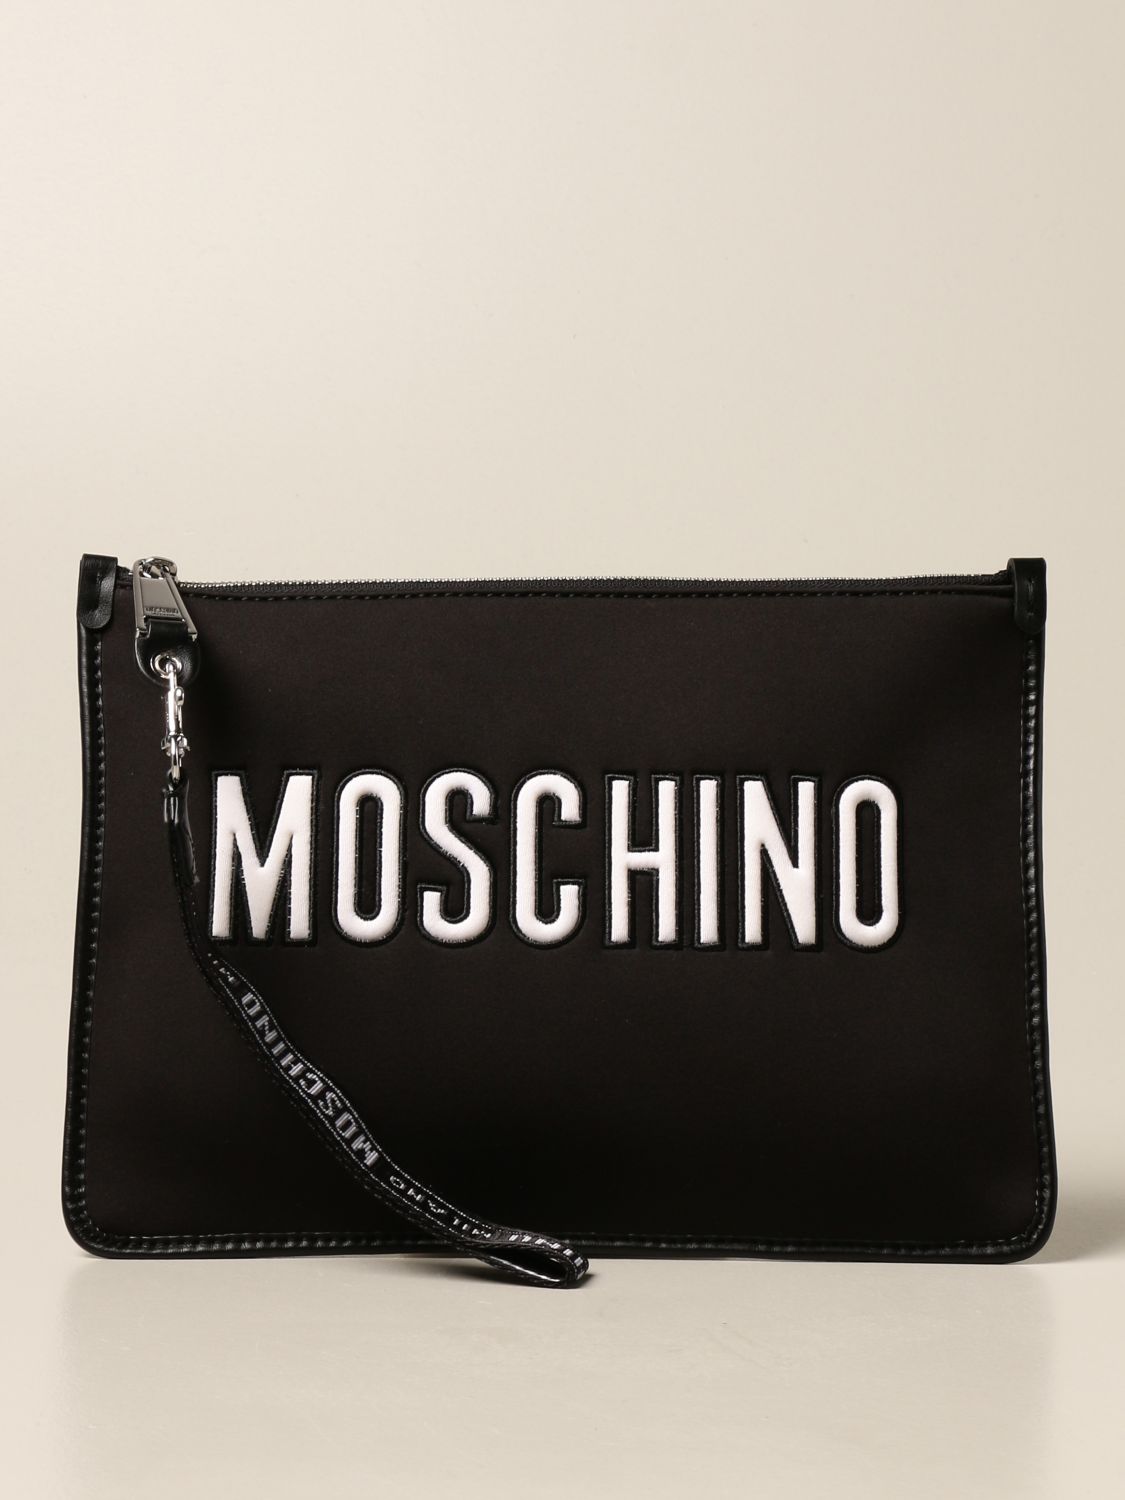 Moschino Couture Outlet: mini bag for woman - Black 1 | Moschino ...